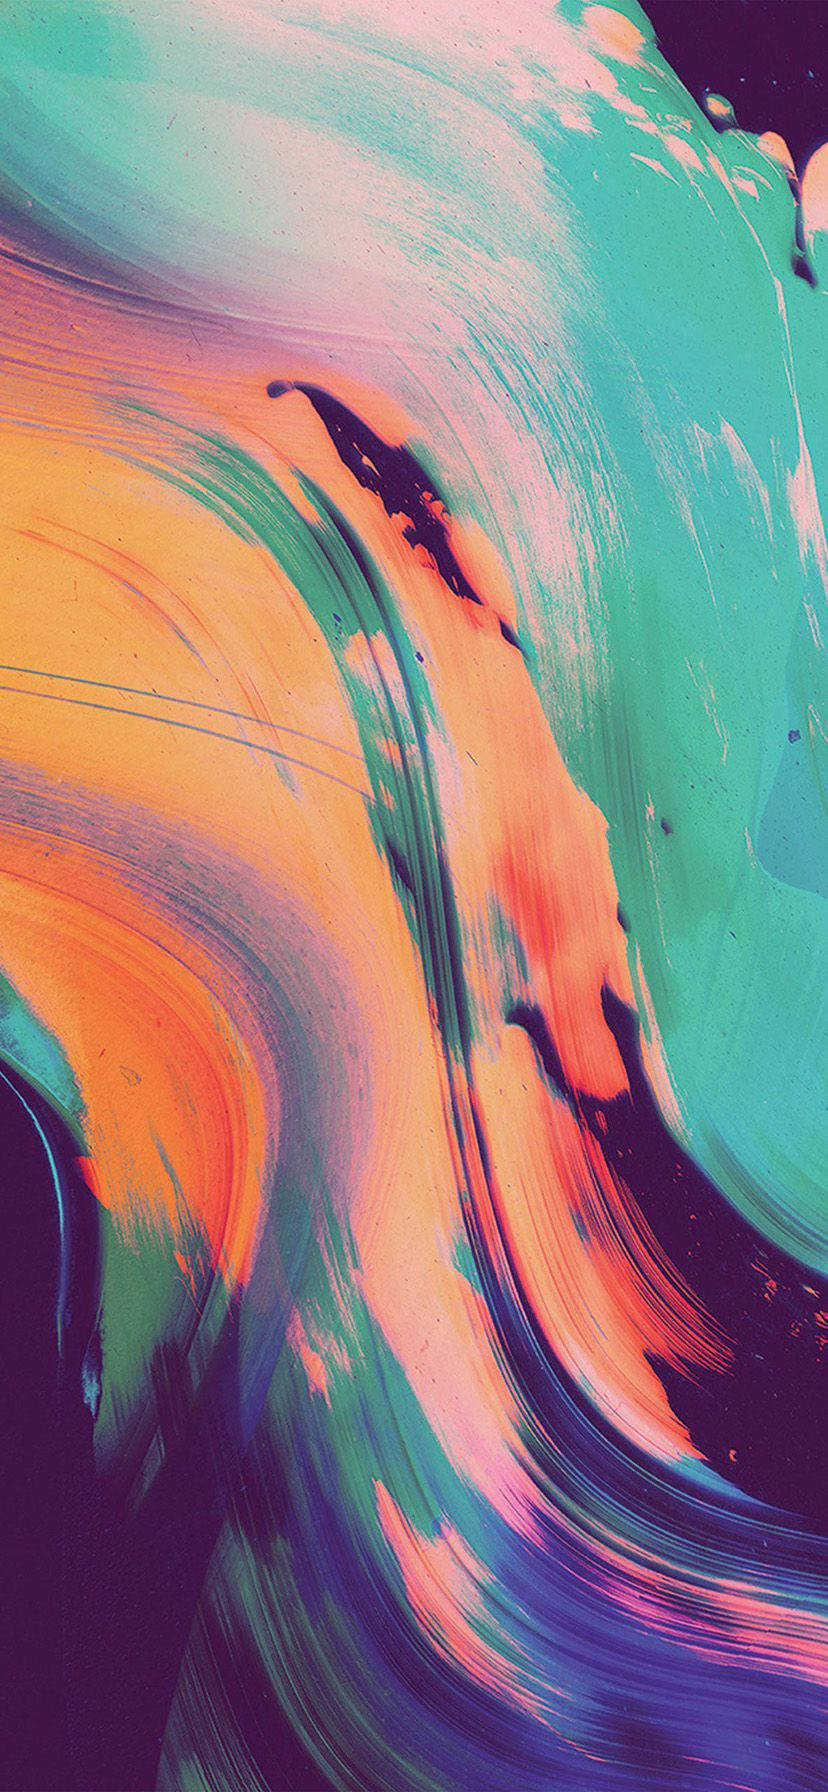 Iphone Xr Colorful Abstract Strokes Wallpaper